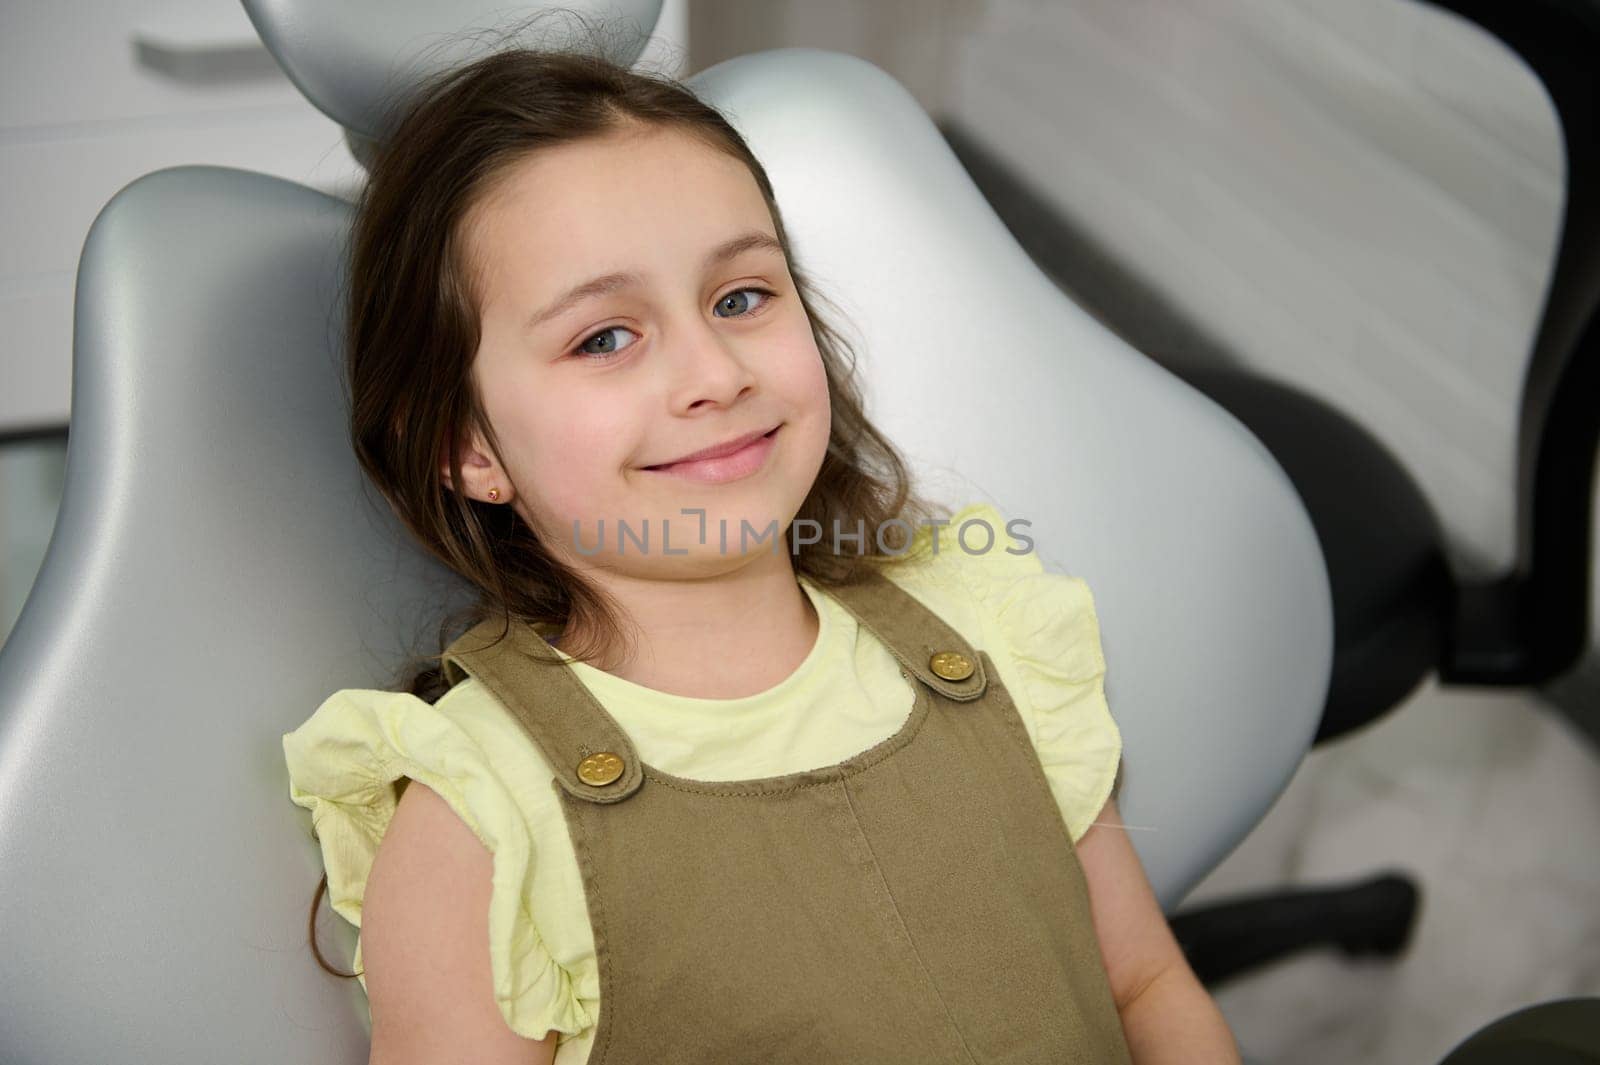 Beautiful kid girl, a patient in dental chair, smiling cutely looking at camera while an appointment in dentistry clinic by artgf